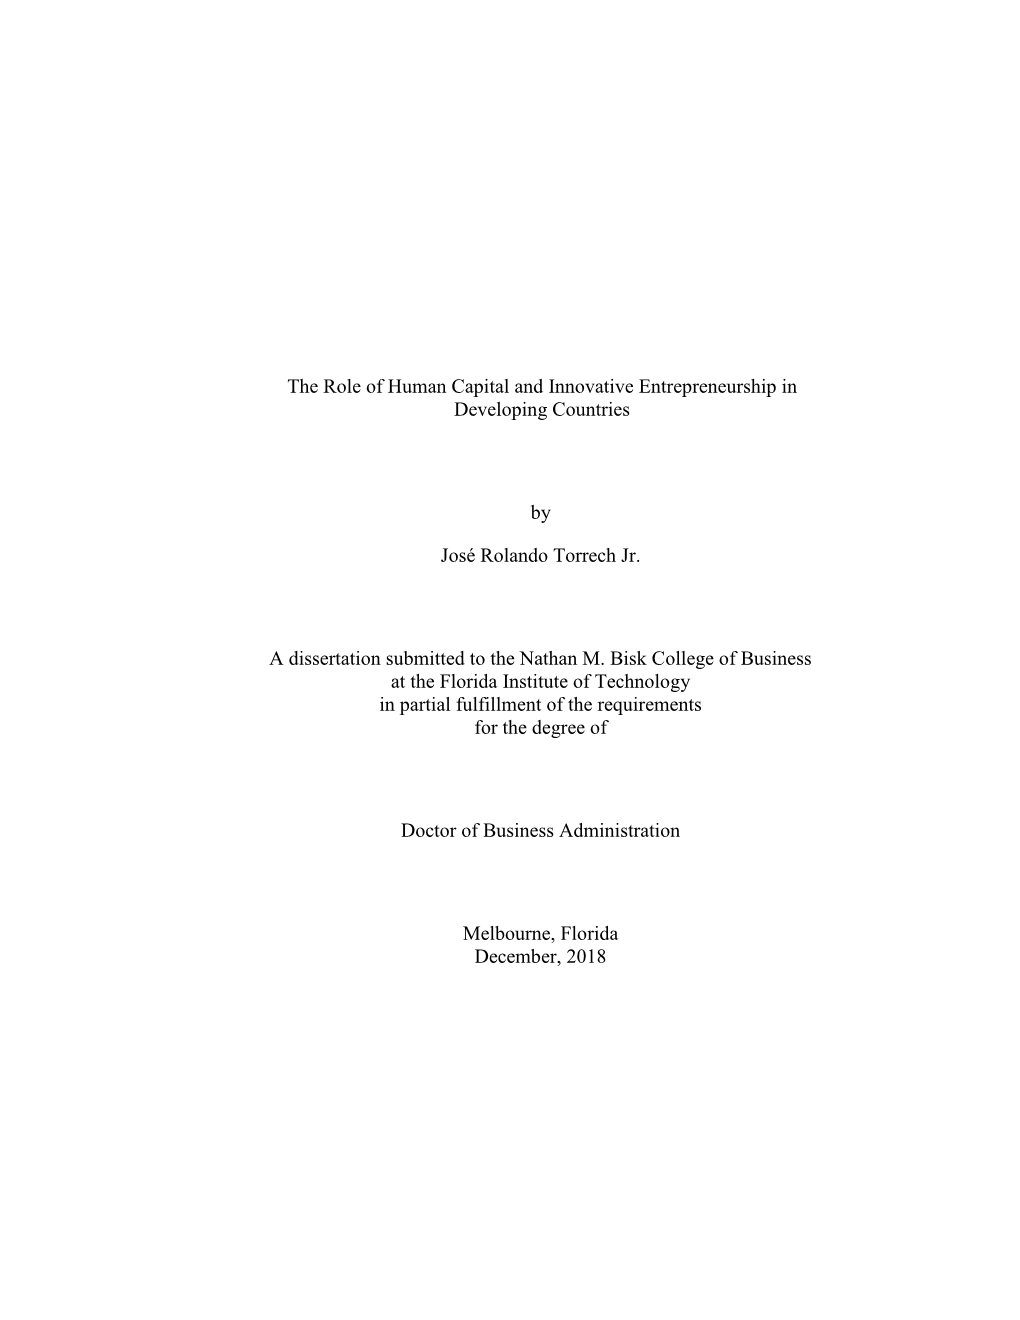 The Role of Human Capital and Innovative Entrepreneurship in Developing Countries by José Rolando Torrech Jr. a Dissertation Su